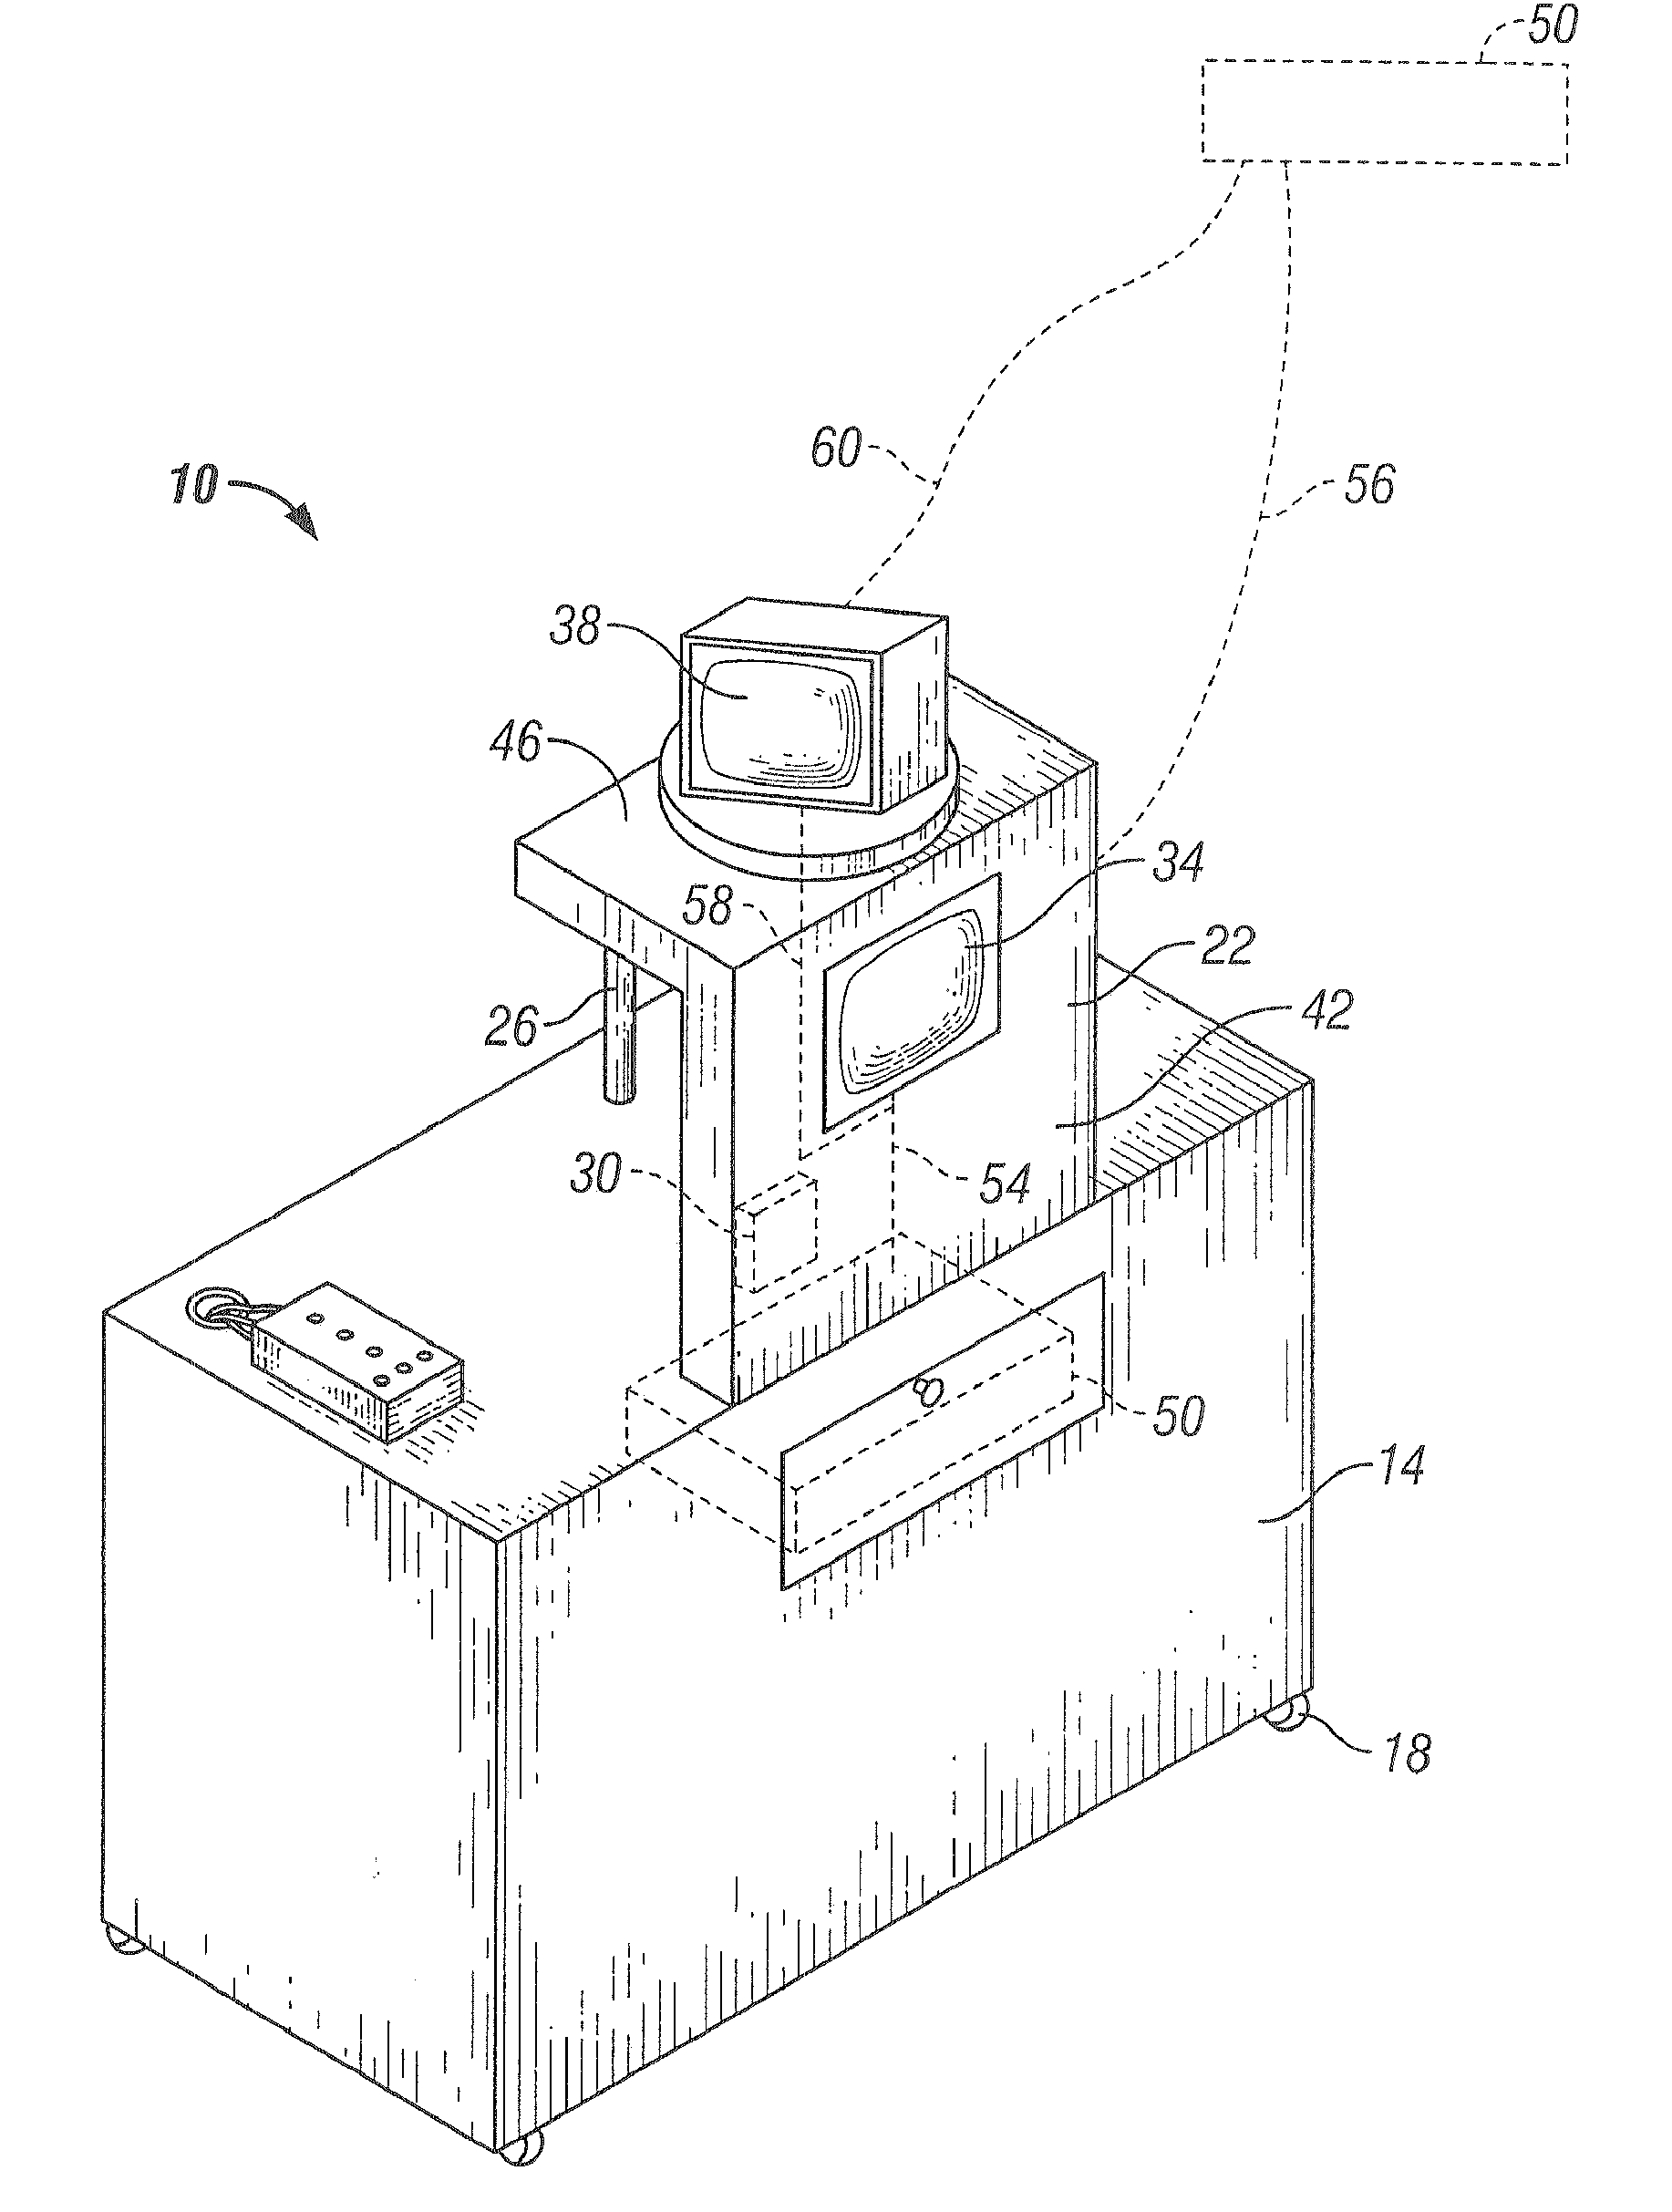 Method and apparatus for advertising adjacent to a beverage dispenser to facilitate advertising income device placement in high traffic venues